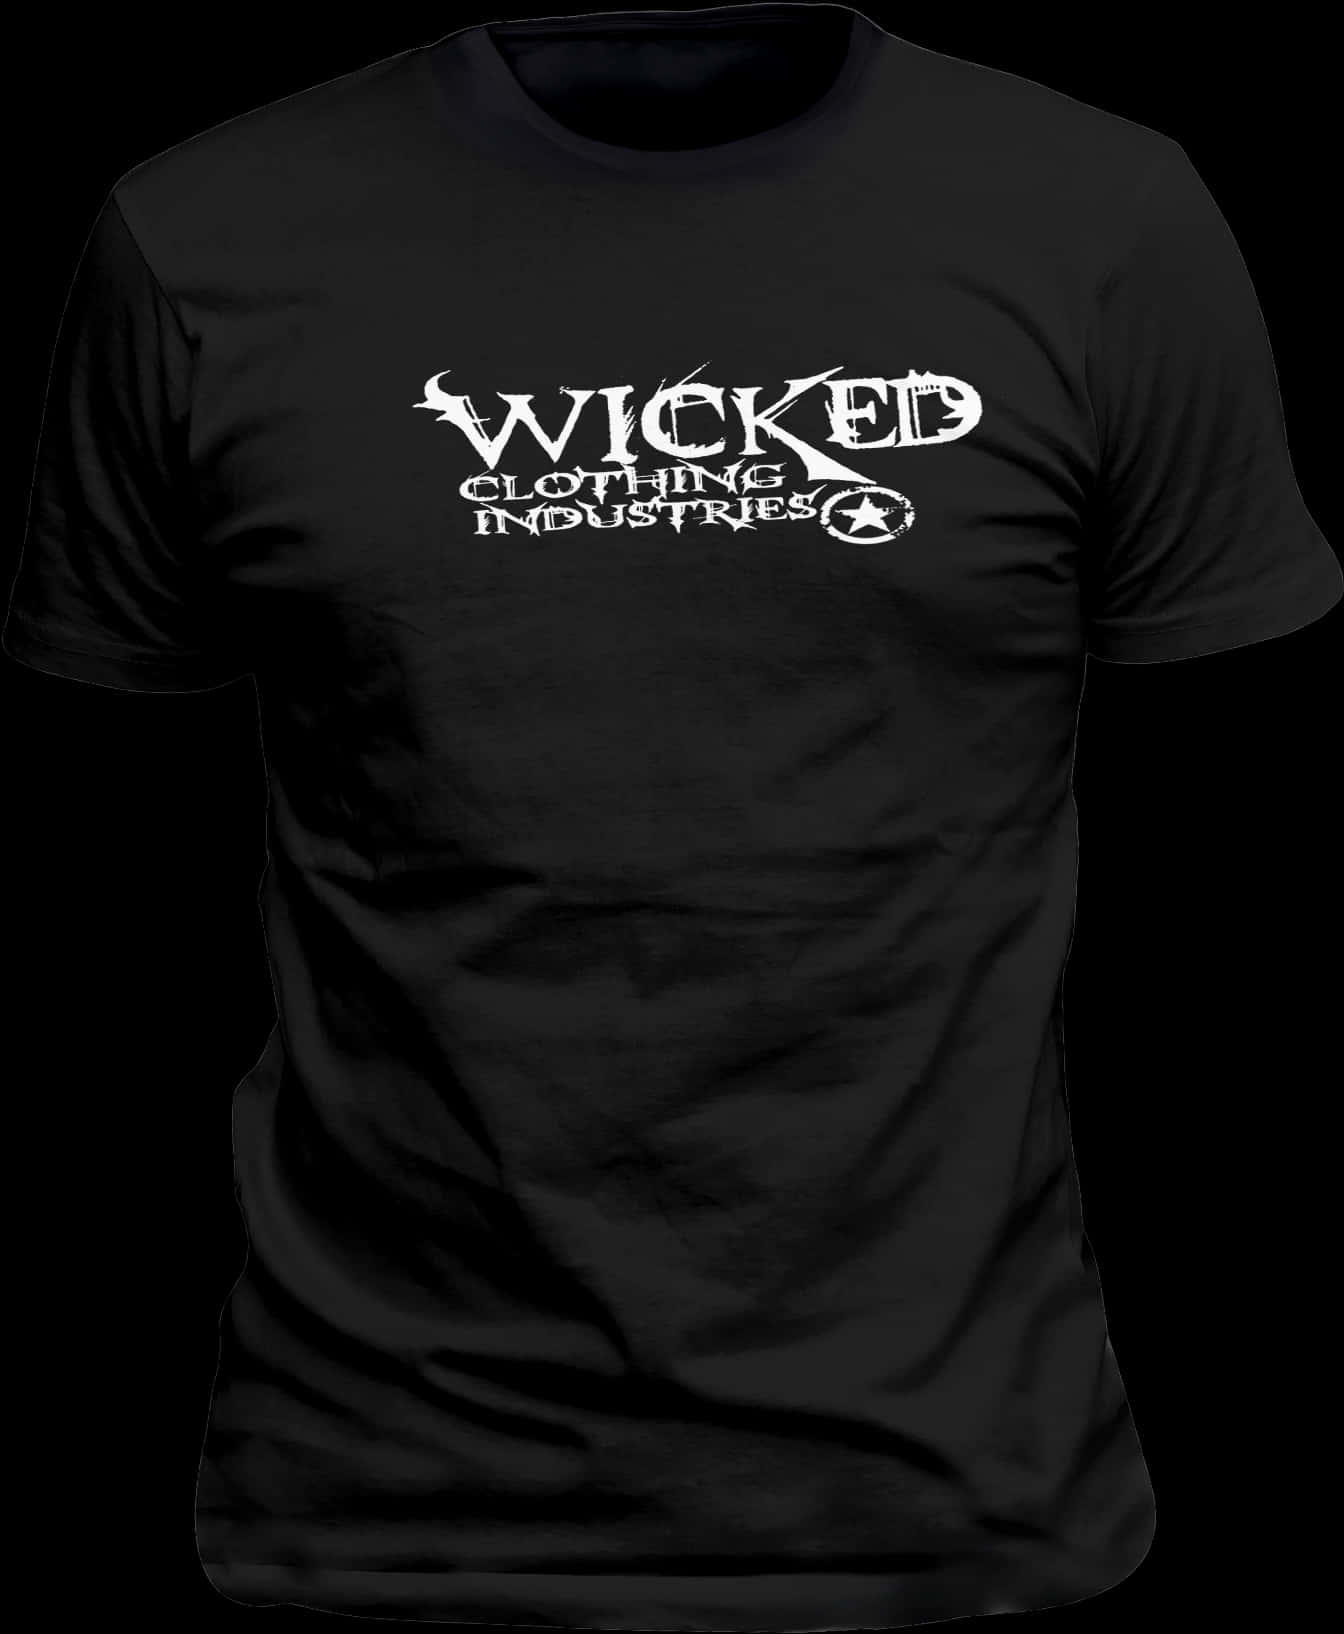 Black Wicked Clothing Industries Shirt PNG image